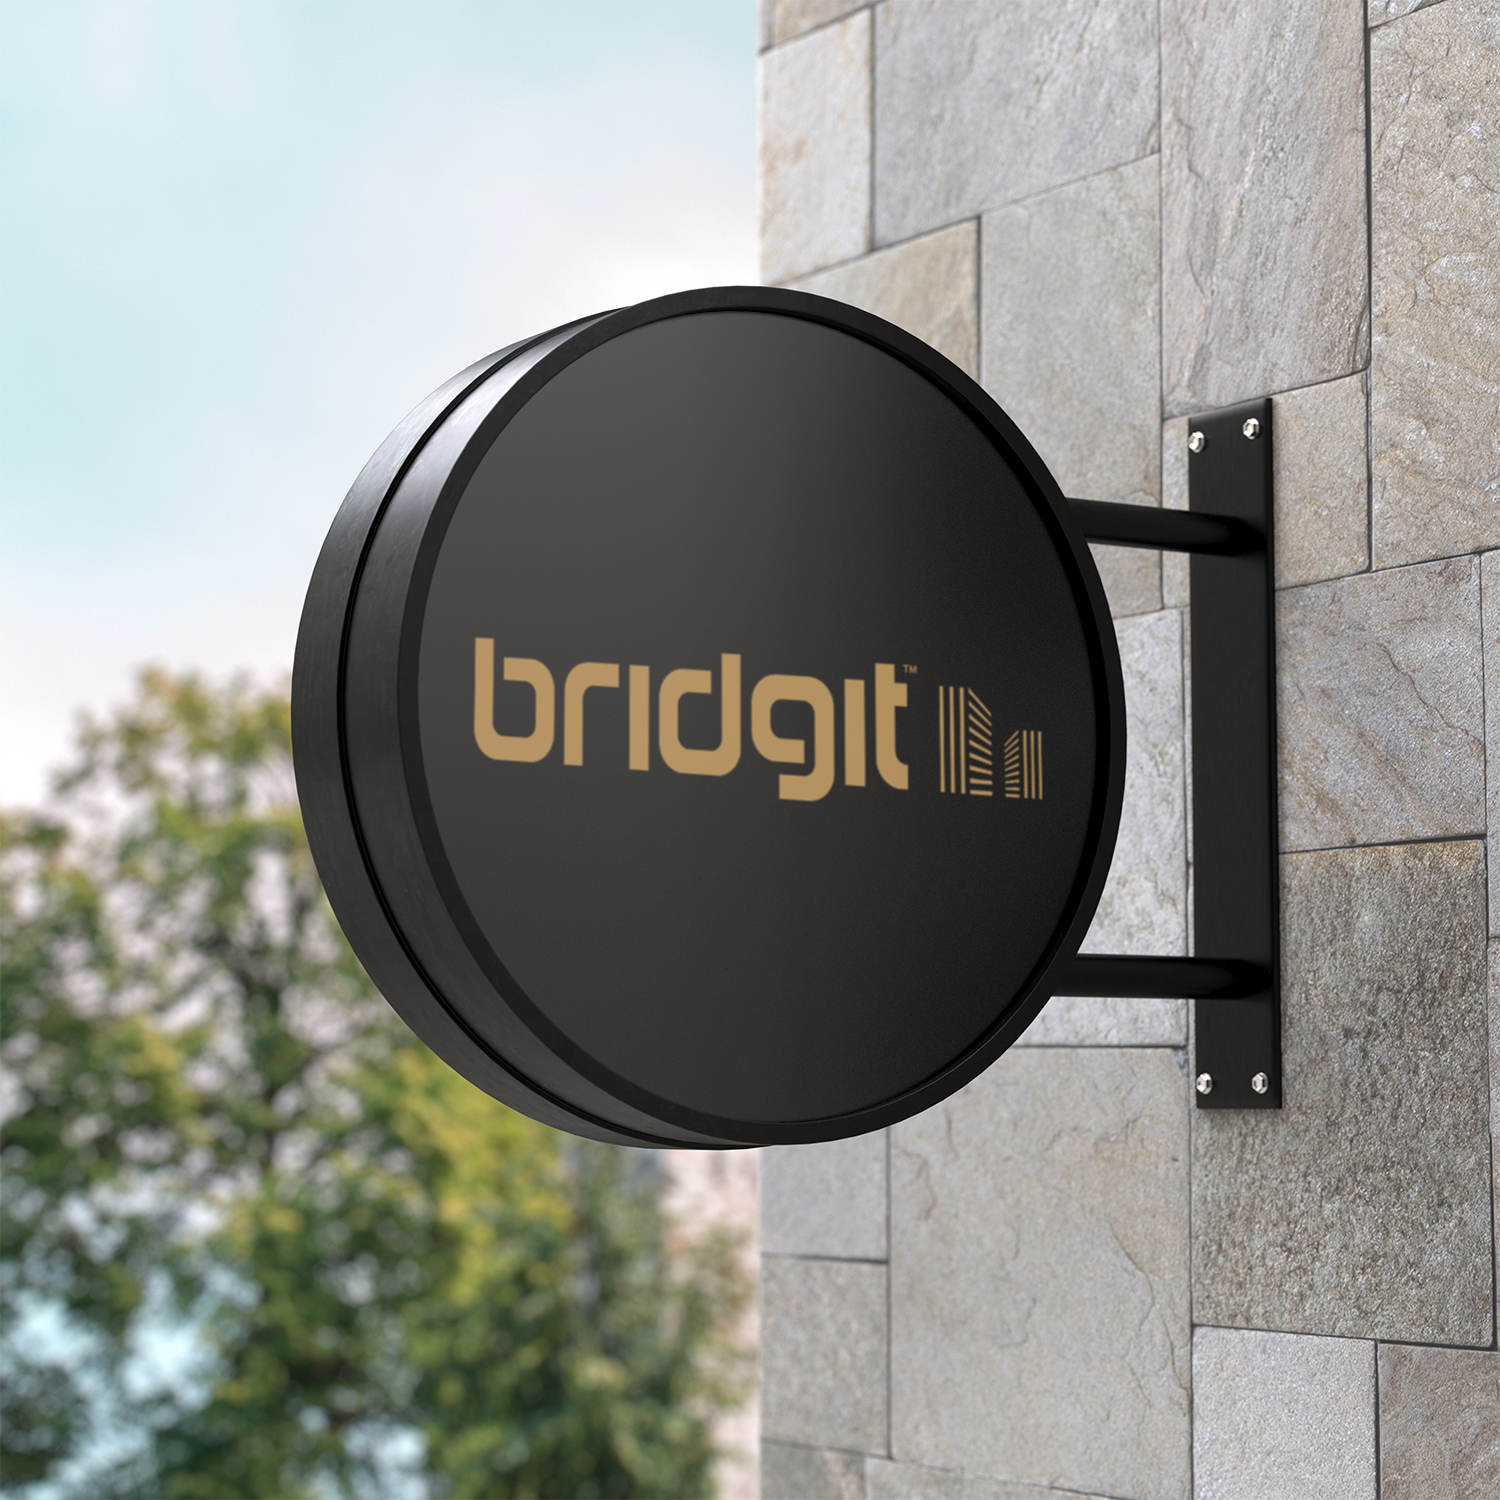 Bridgit logo on a wallsign mounted on the wall.